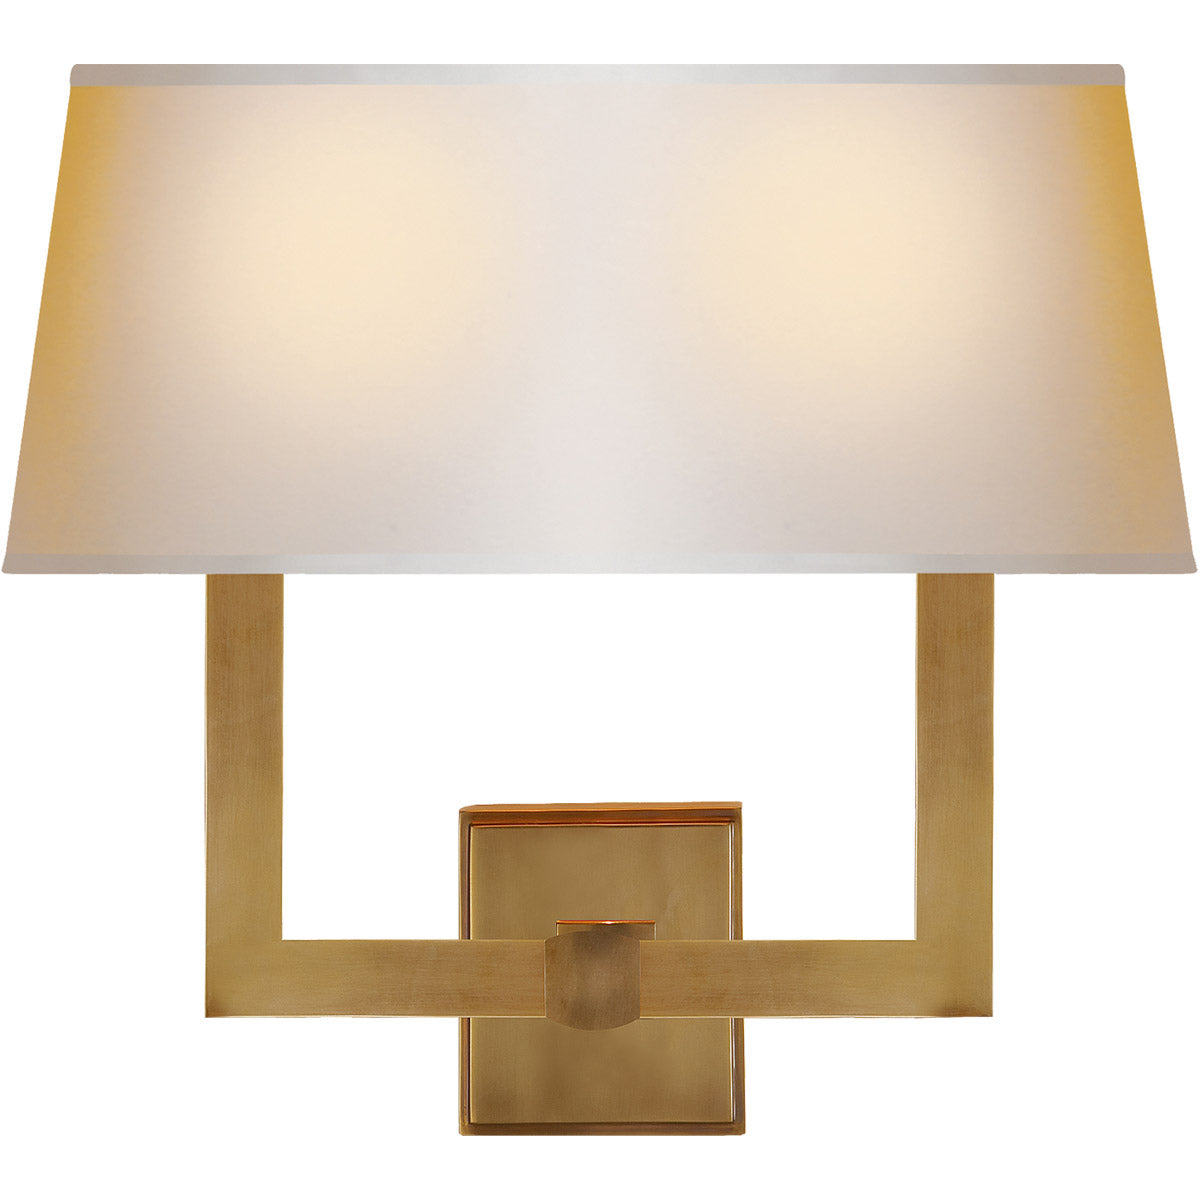 Two-Light Square Tube Sconce  - CLEARANCE